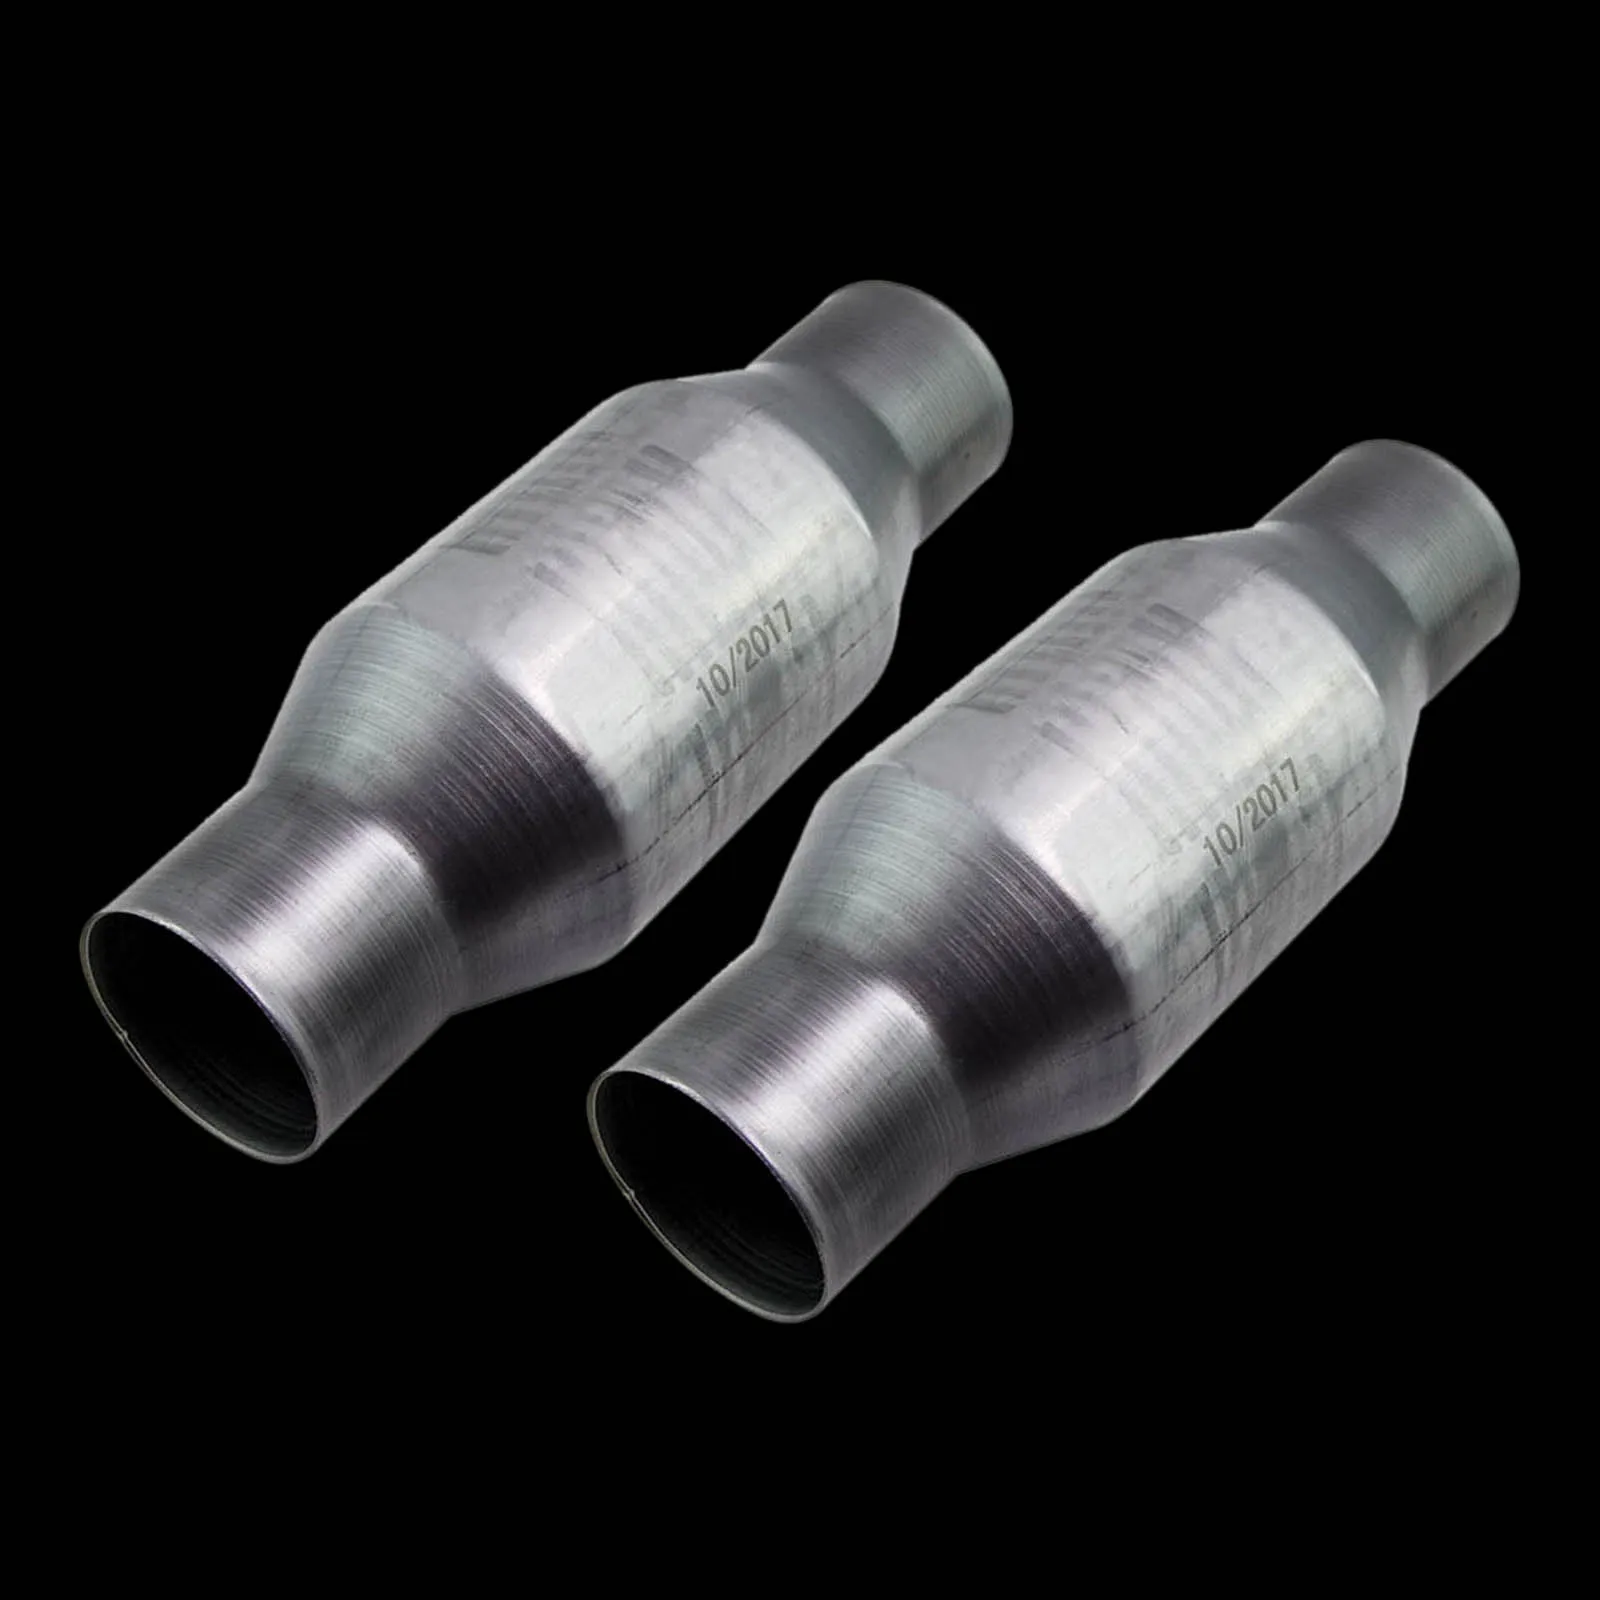 2x 2.5 inches Vehicles Catalytic Converter High Flow Stainless steel 410250